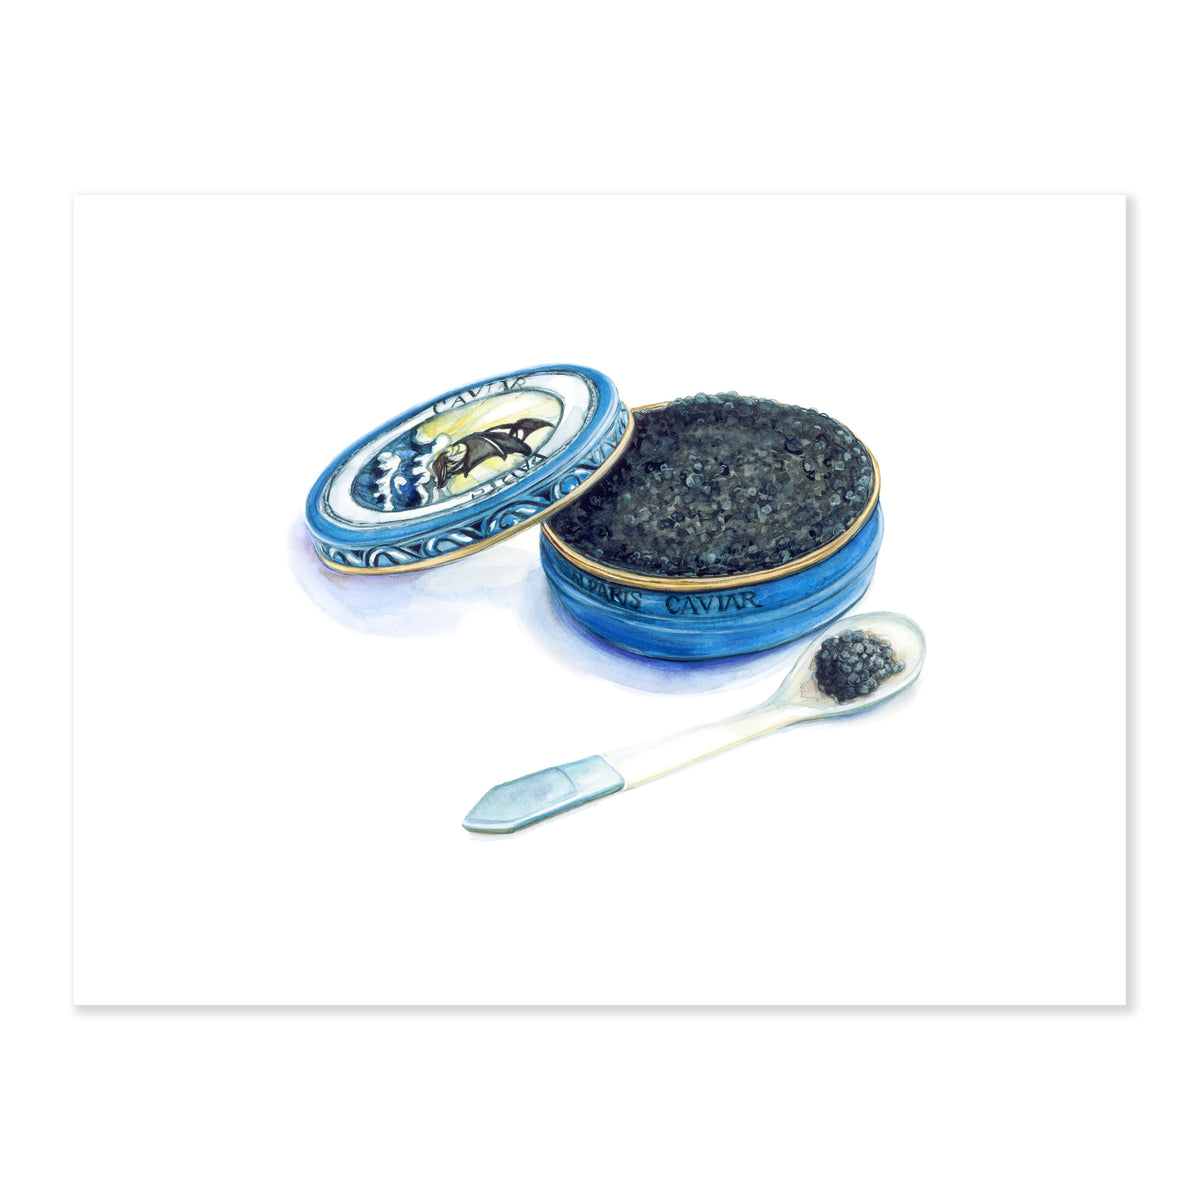 A fine art print illustrating an open blue tin of caviar with a small silver spoon beside it painted in watercolor on a soft white background